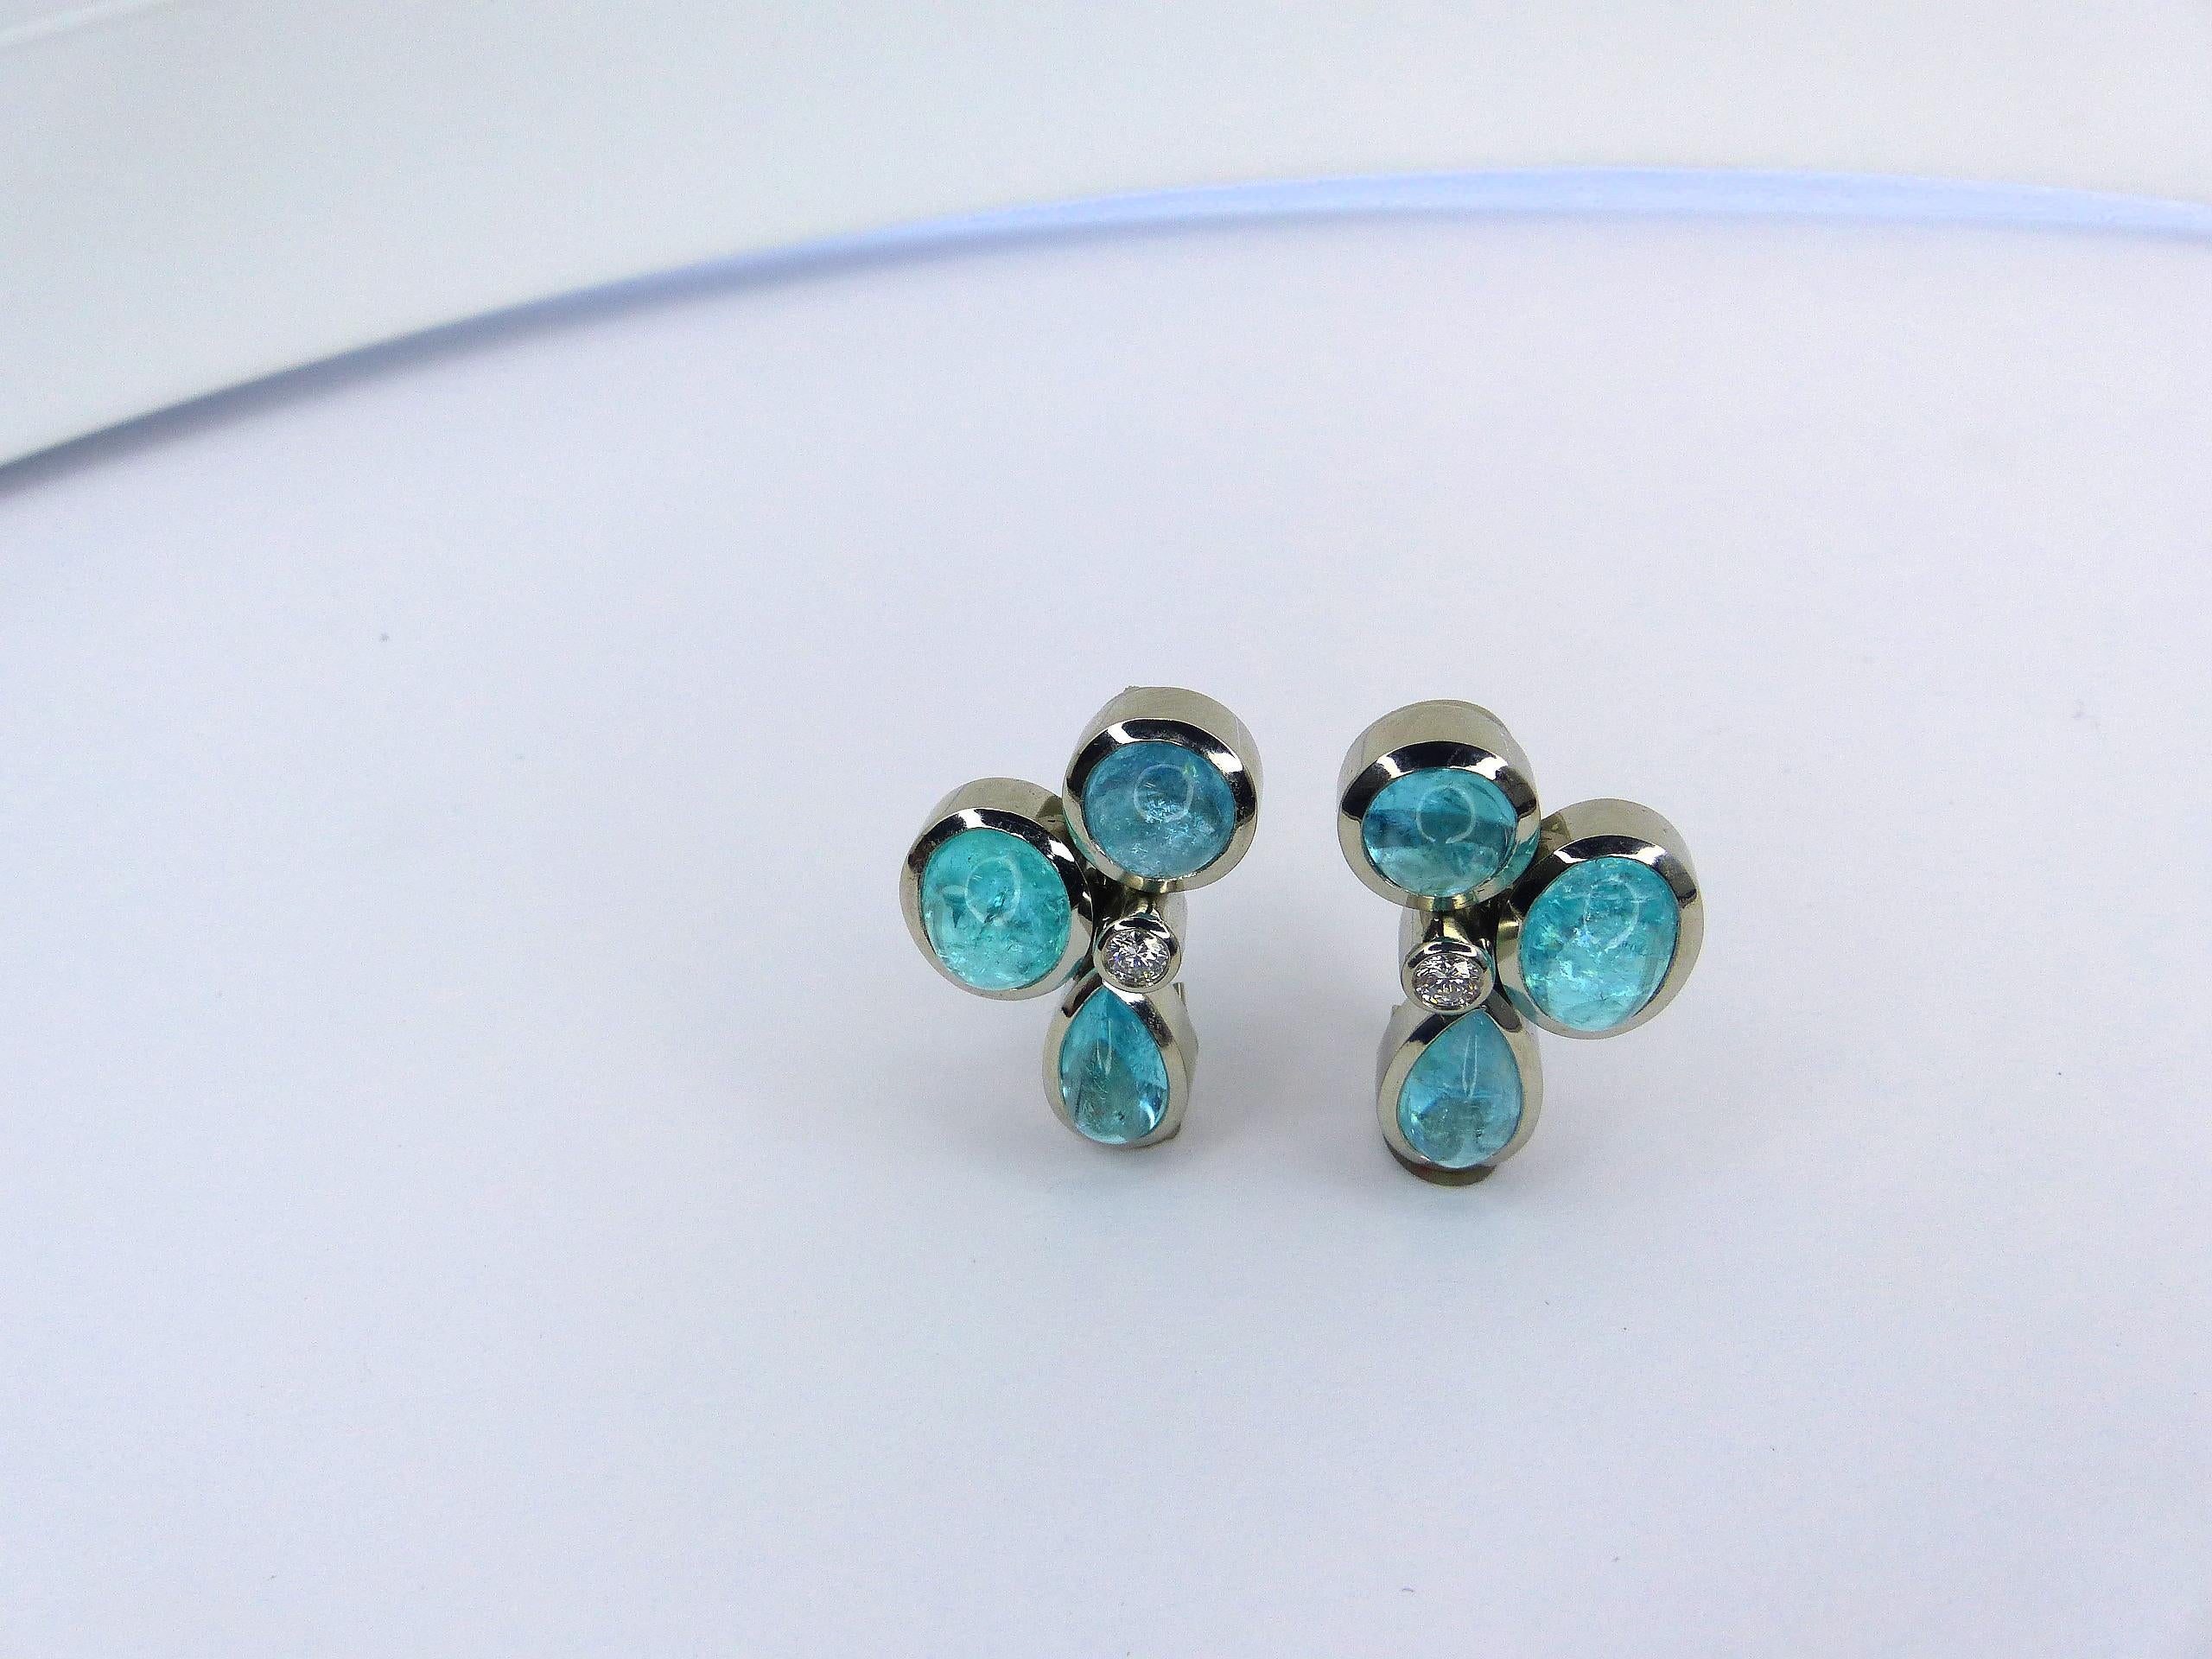 Cabochon Earrings in Platinum with 6 Paraiba Tourmaline Cabouchons and 2 Diamonds For Sale